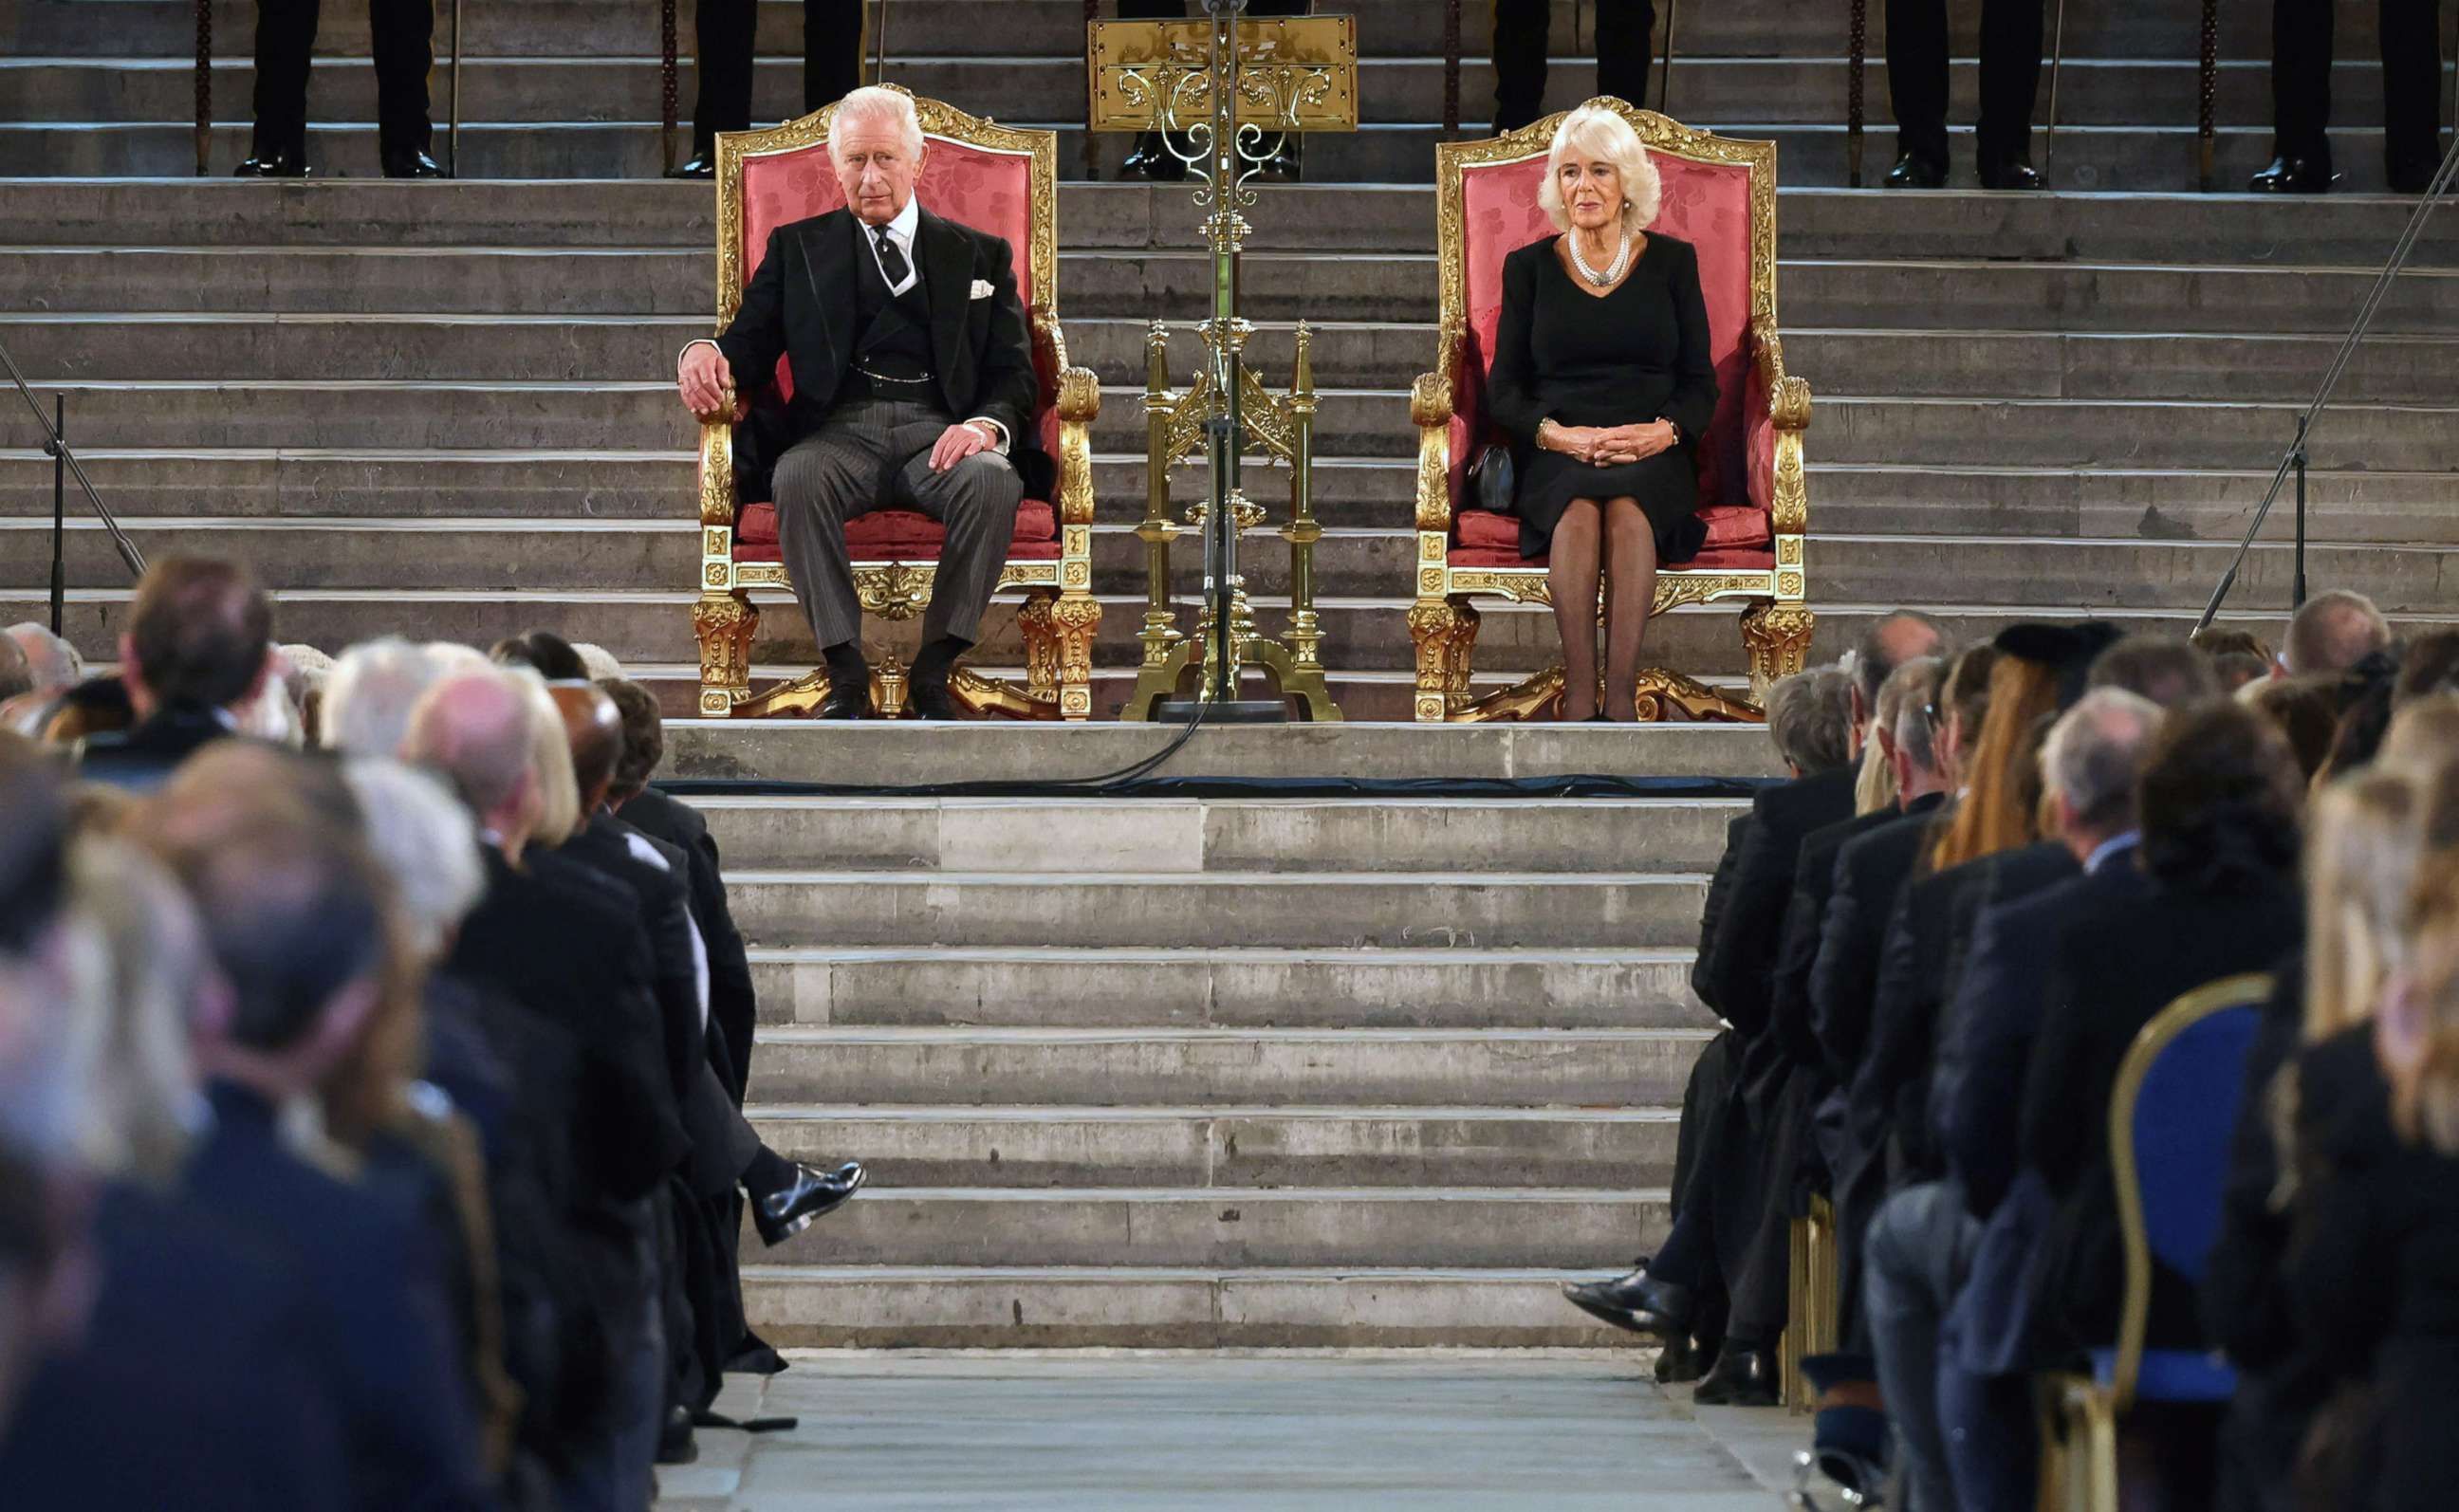 PHOTO: King Charles III and Camilla, Queen Consort attend the presentation of Addresses by both Houses of Parliament in Westminster Hall, inside the Palace of Westminster, central London, Sept. 12, 2022.